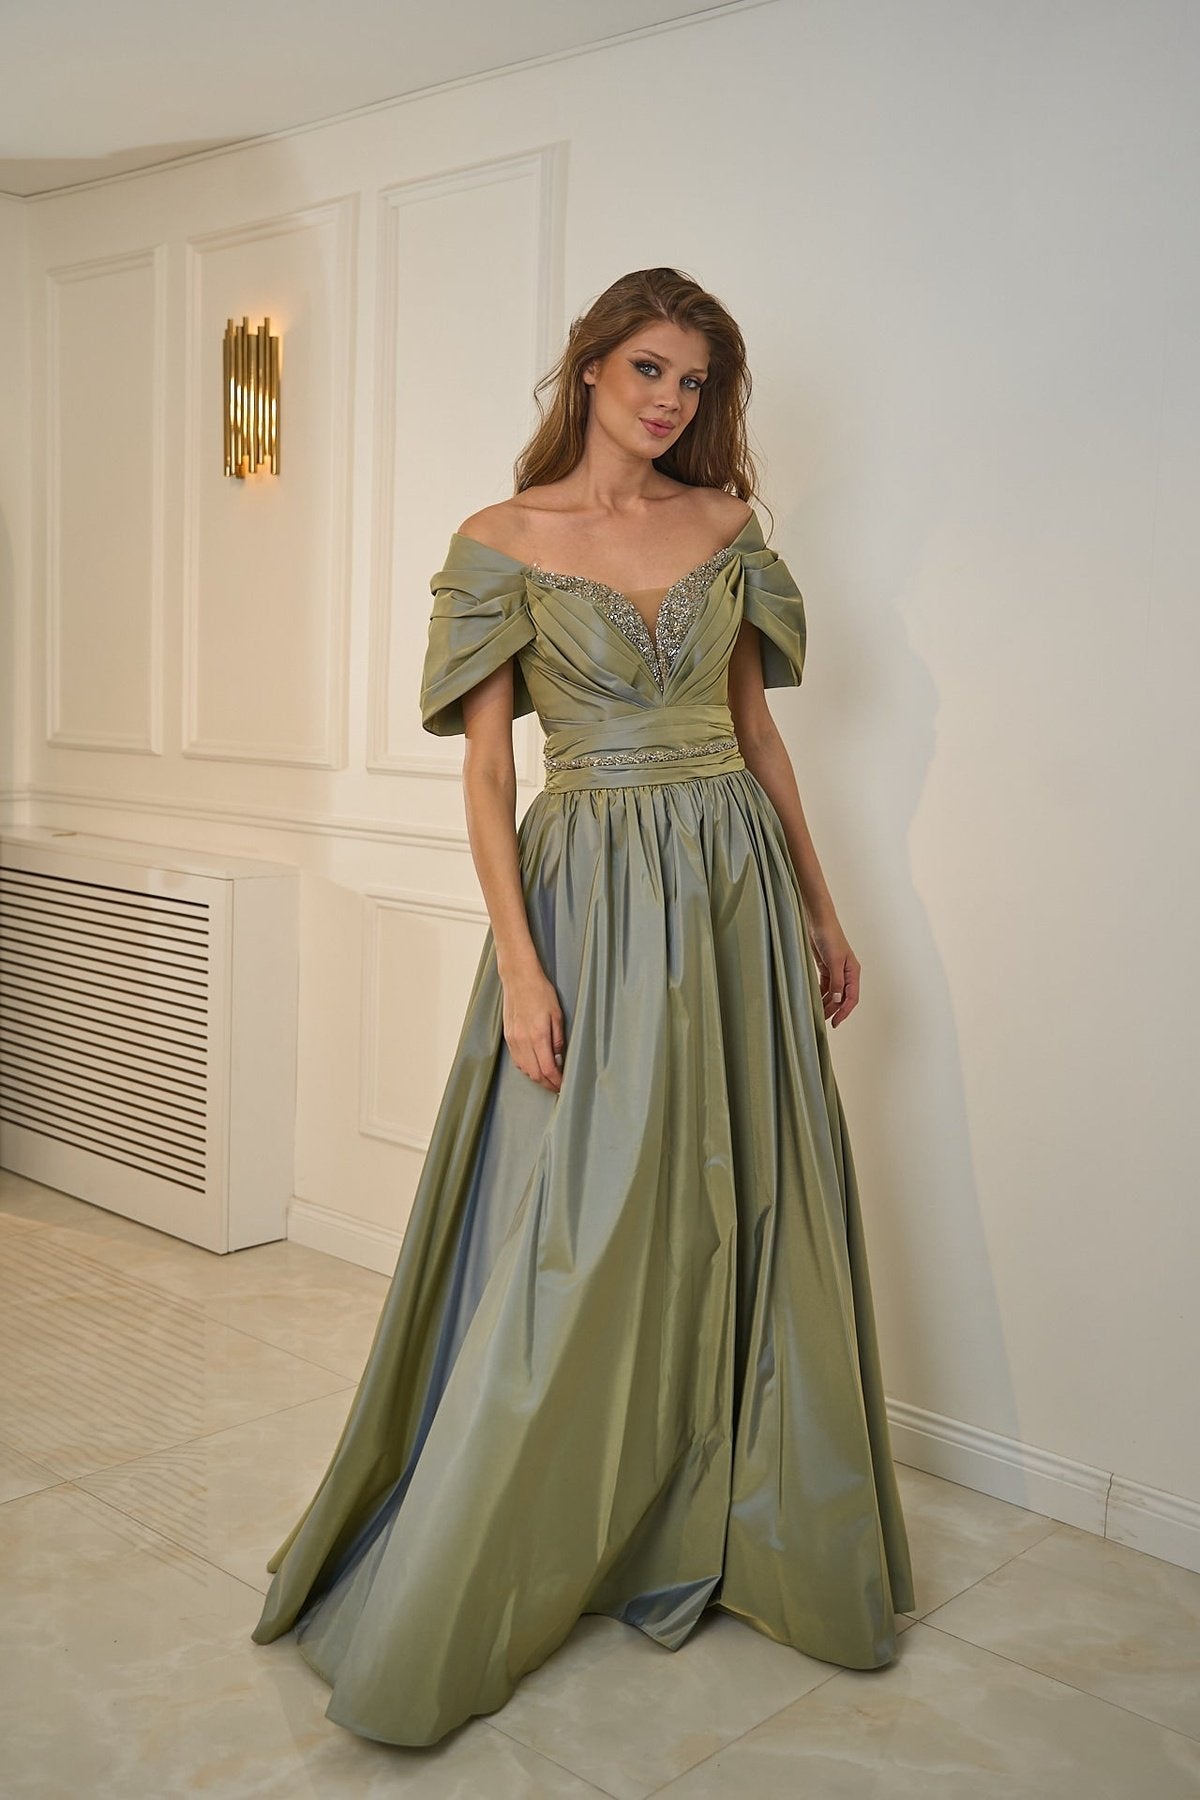 Stone Embroidered Low Sleeve Belt Detailed Long Evening Dress